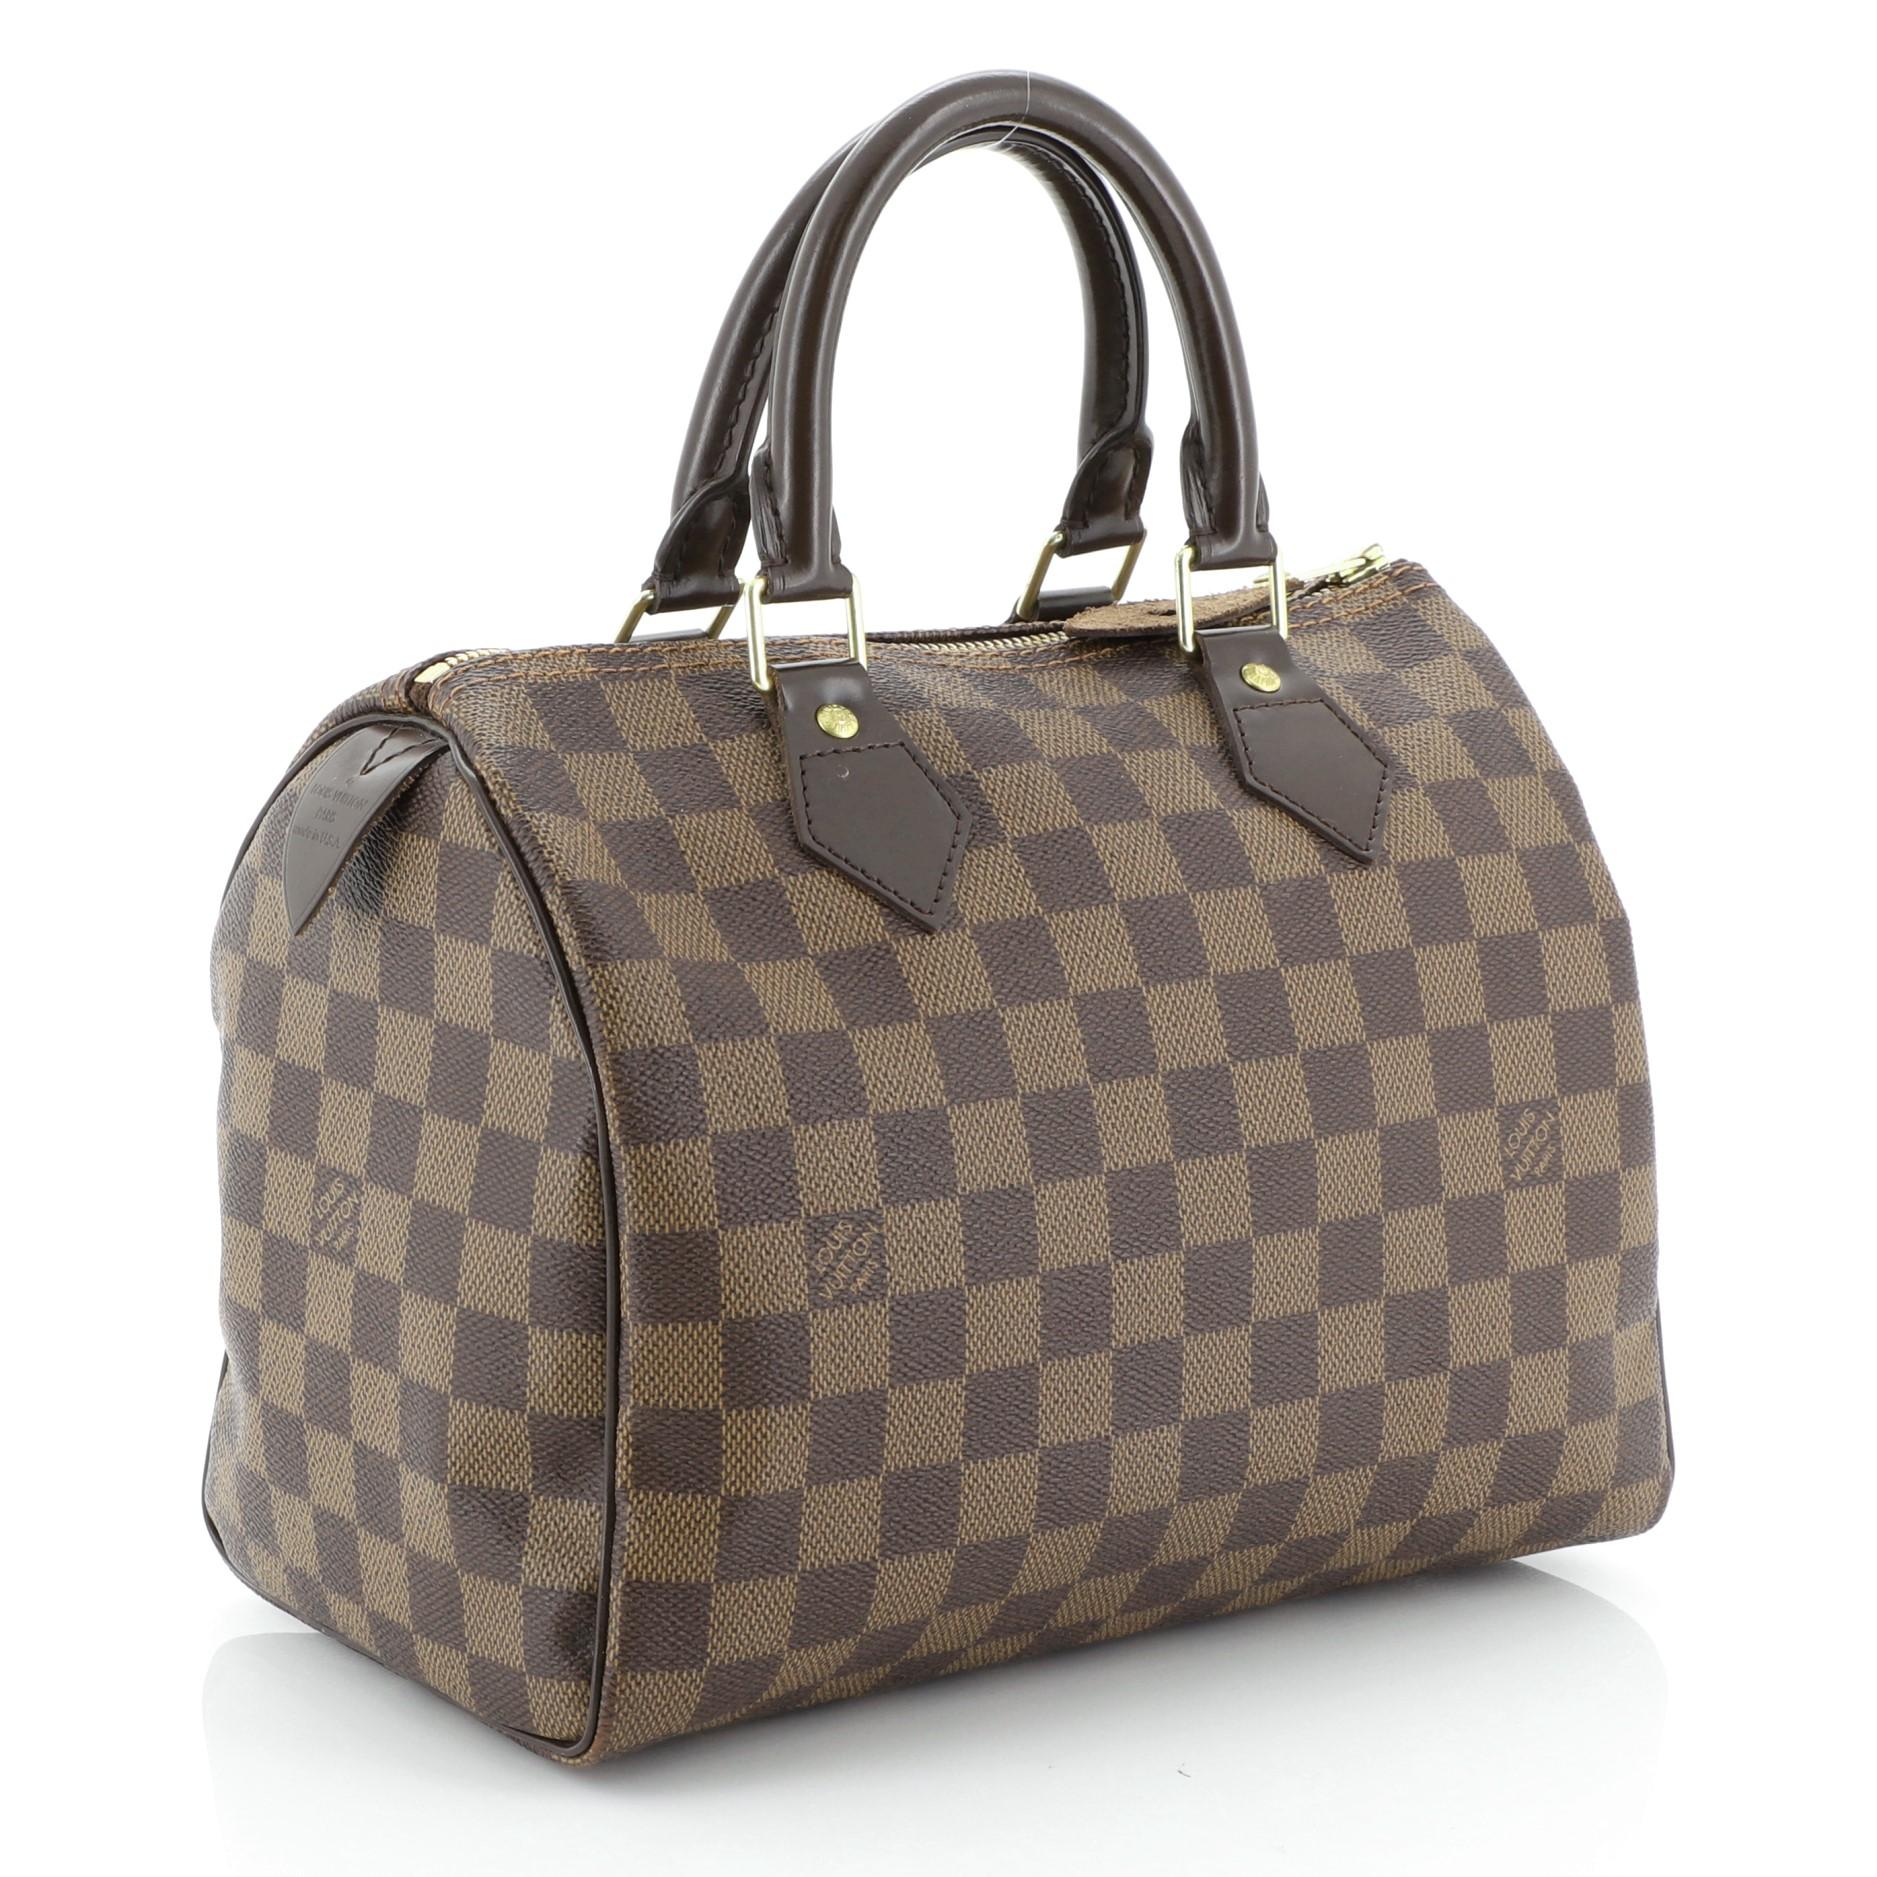 This Louis Vuitton Speedy Handbag Damier 25, crafted in damier ebene coated canvas, features dual rolled handles, vachetta leather trim, and gold-tone hardware. Its zip closure opens to a red fabric interior with slip pocket. Authenticity code